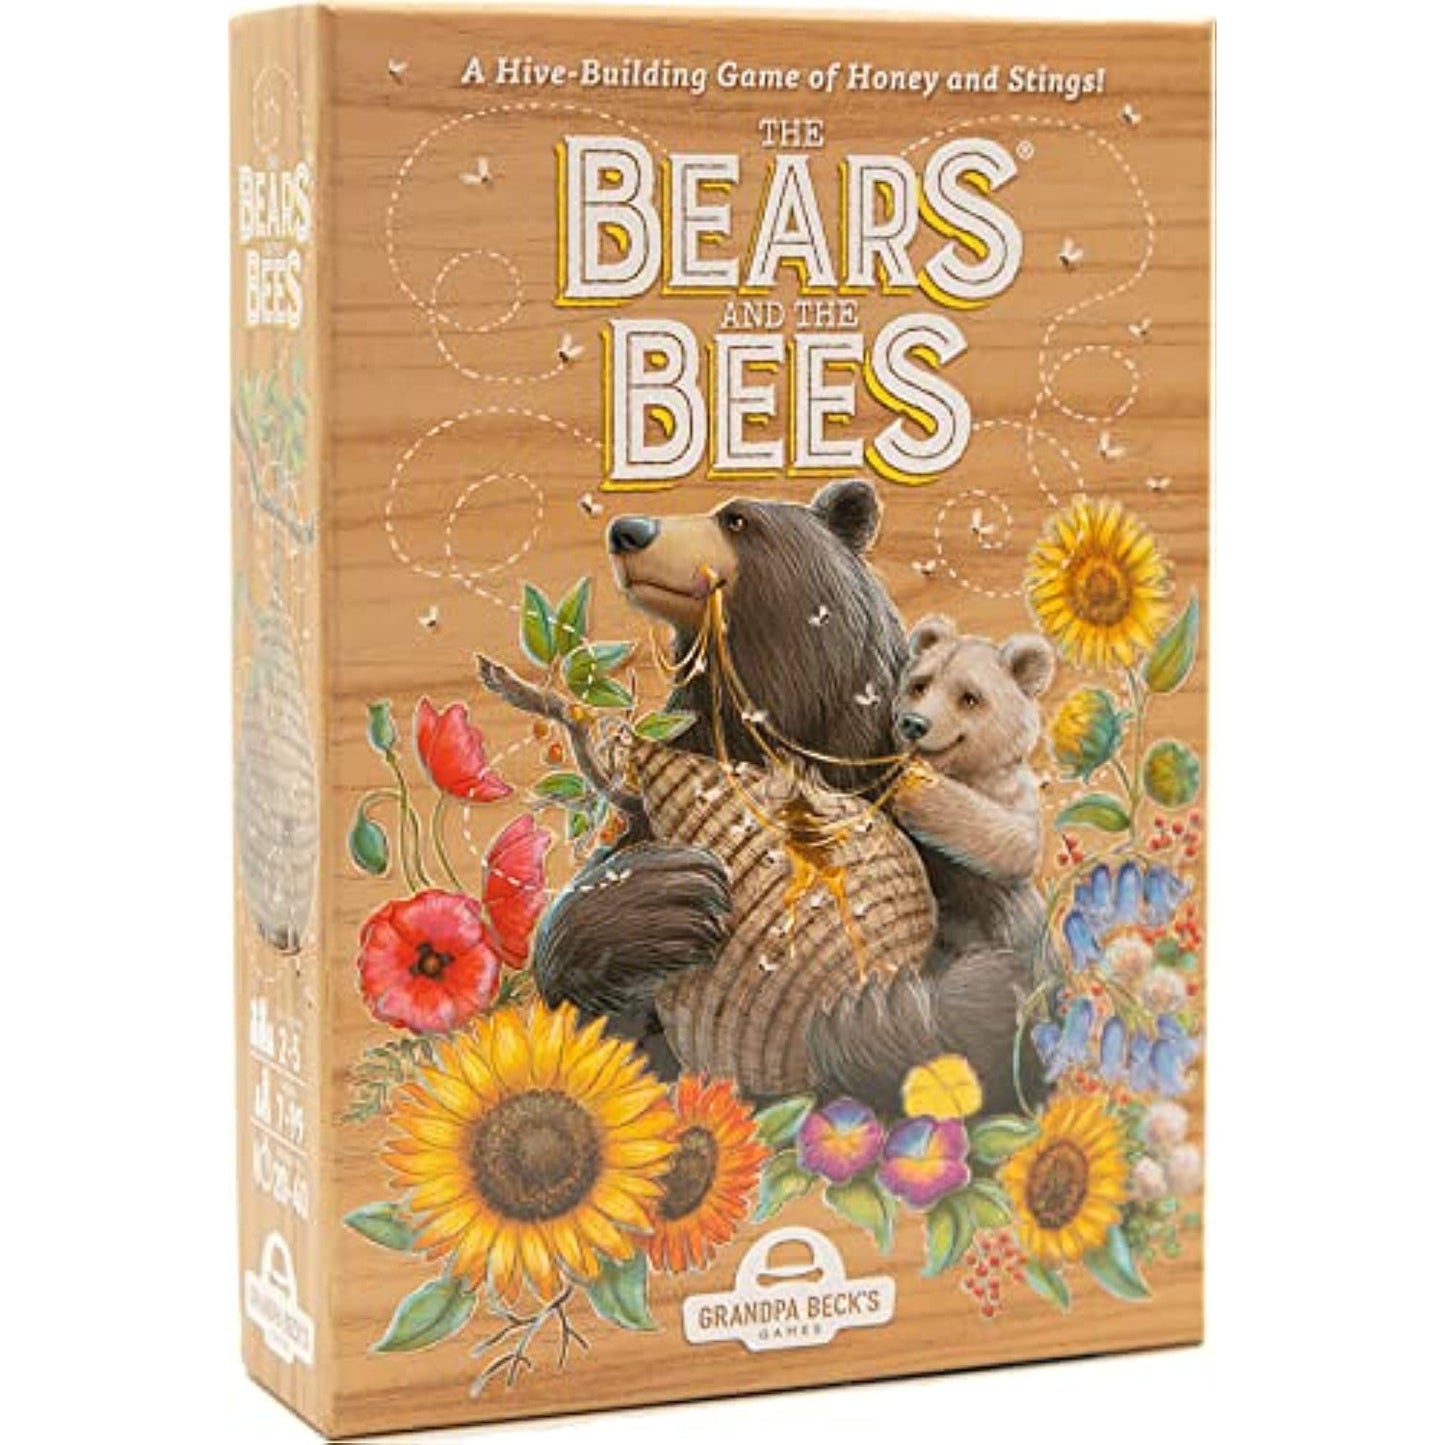 The Bears and Bees